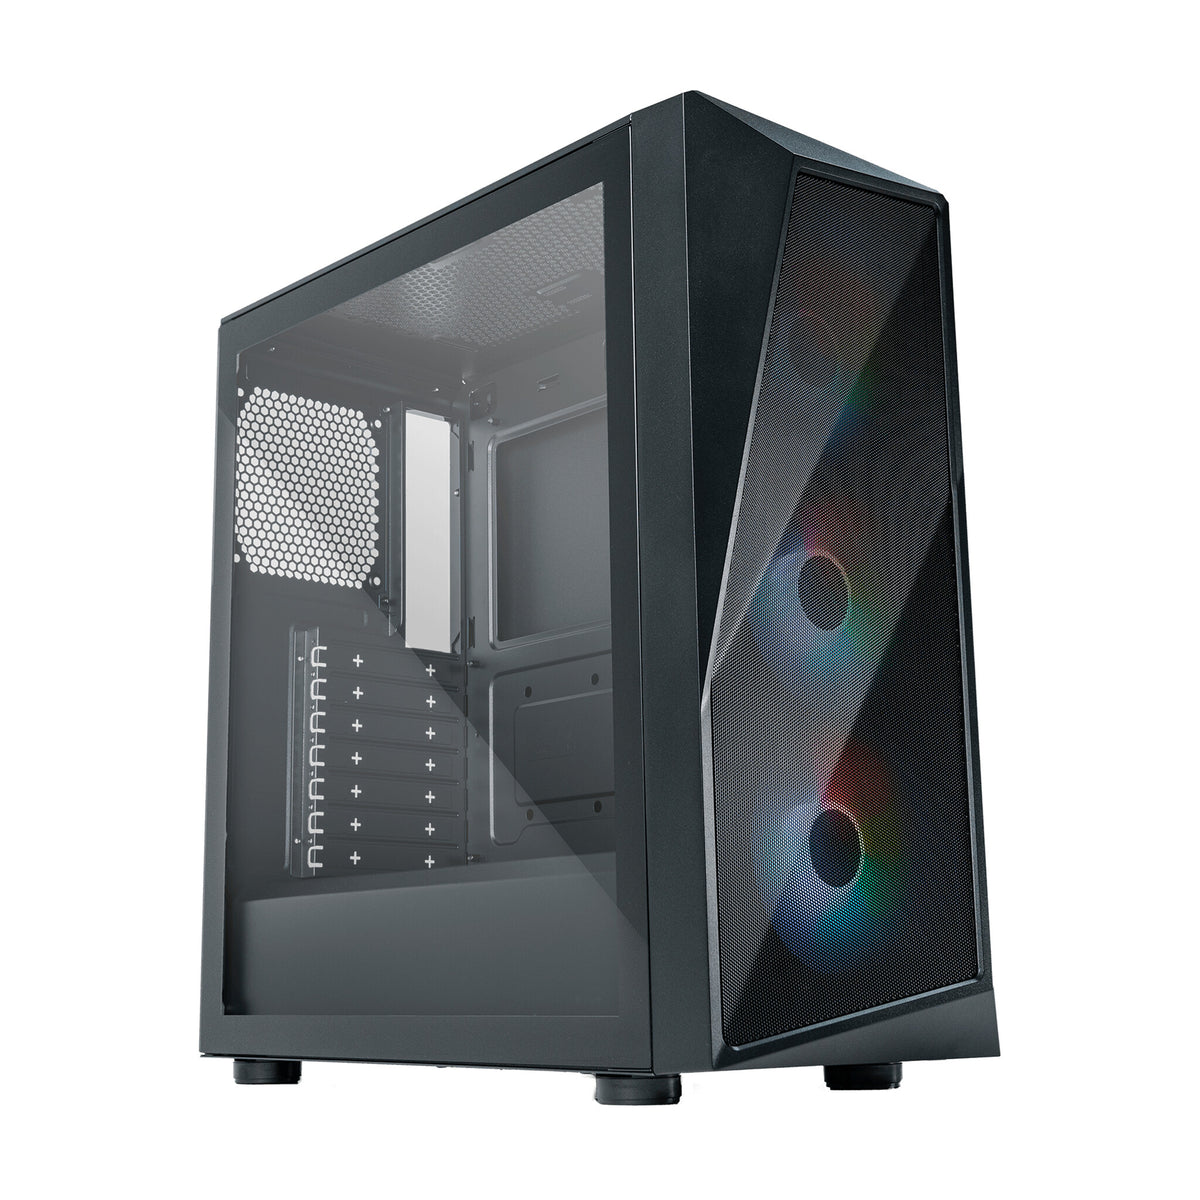 Cooler Master CMP 520 - ATX Mid Tower Case in Black